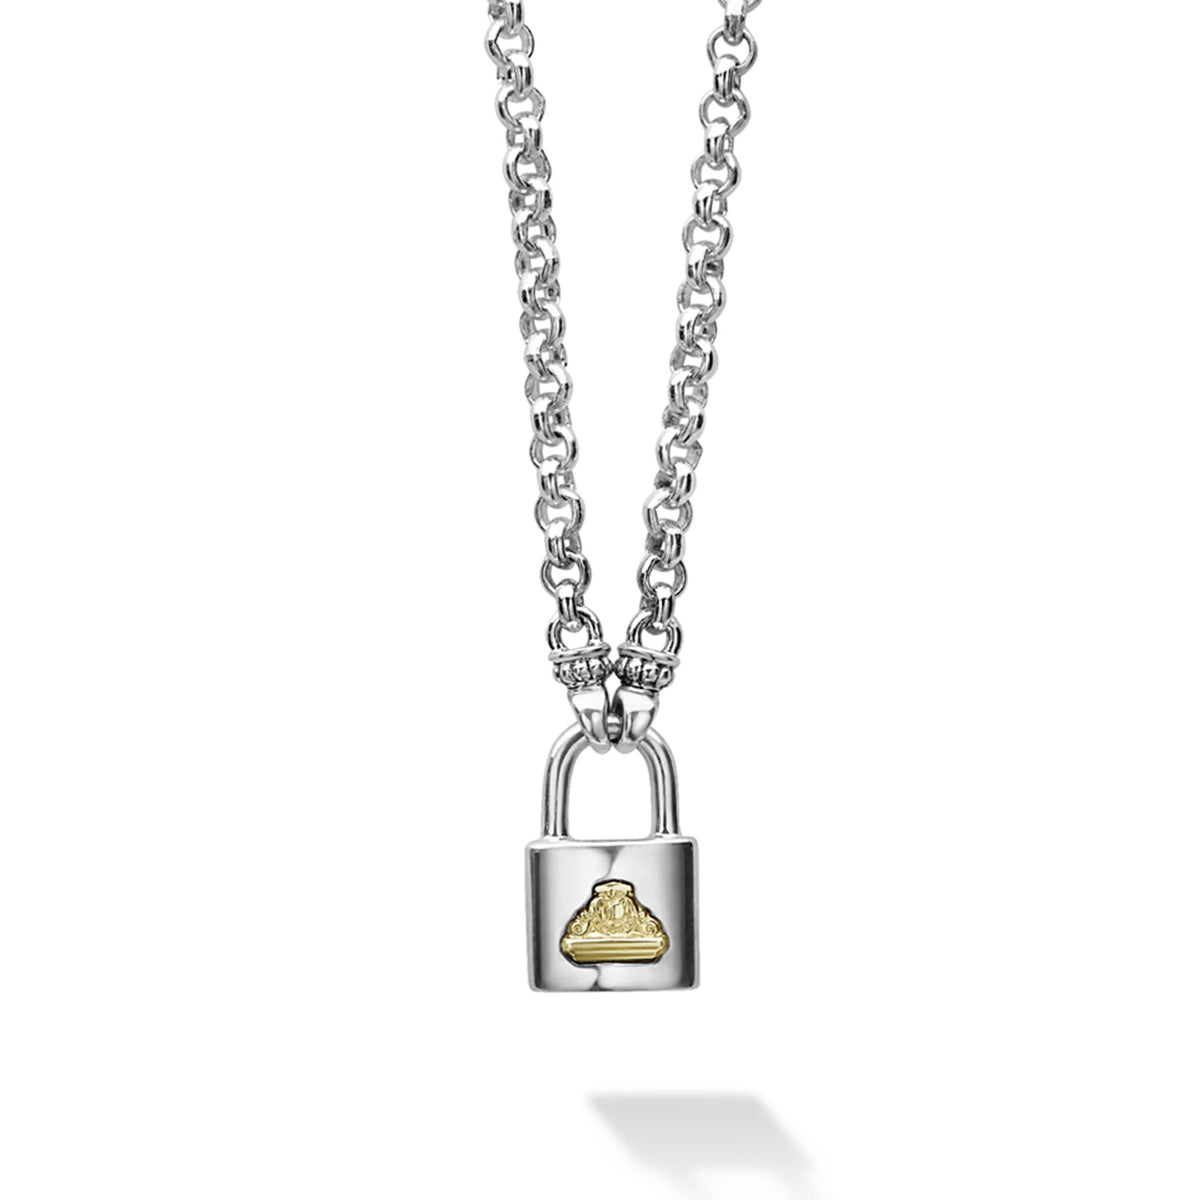 The Lock Pendant - Sterling Silver / Yes (+$10)